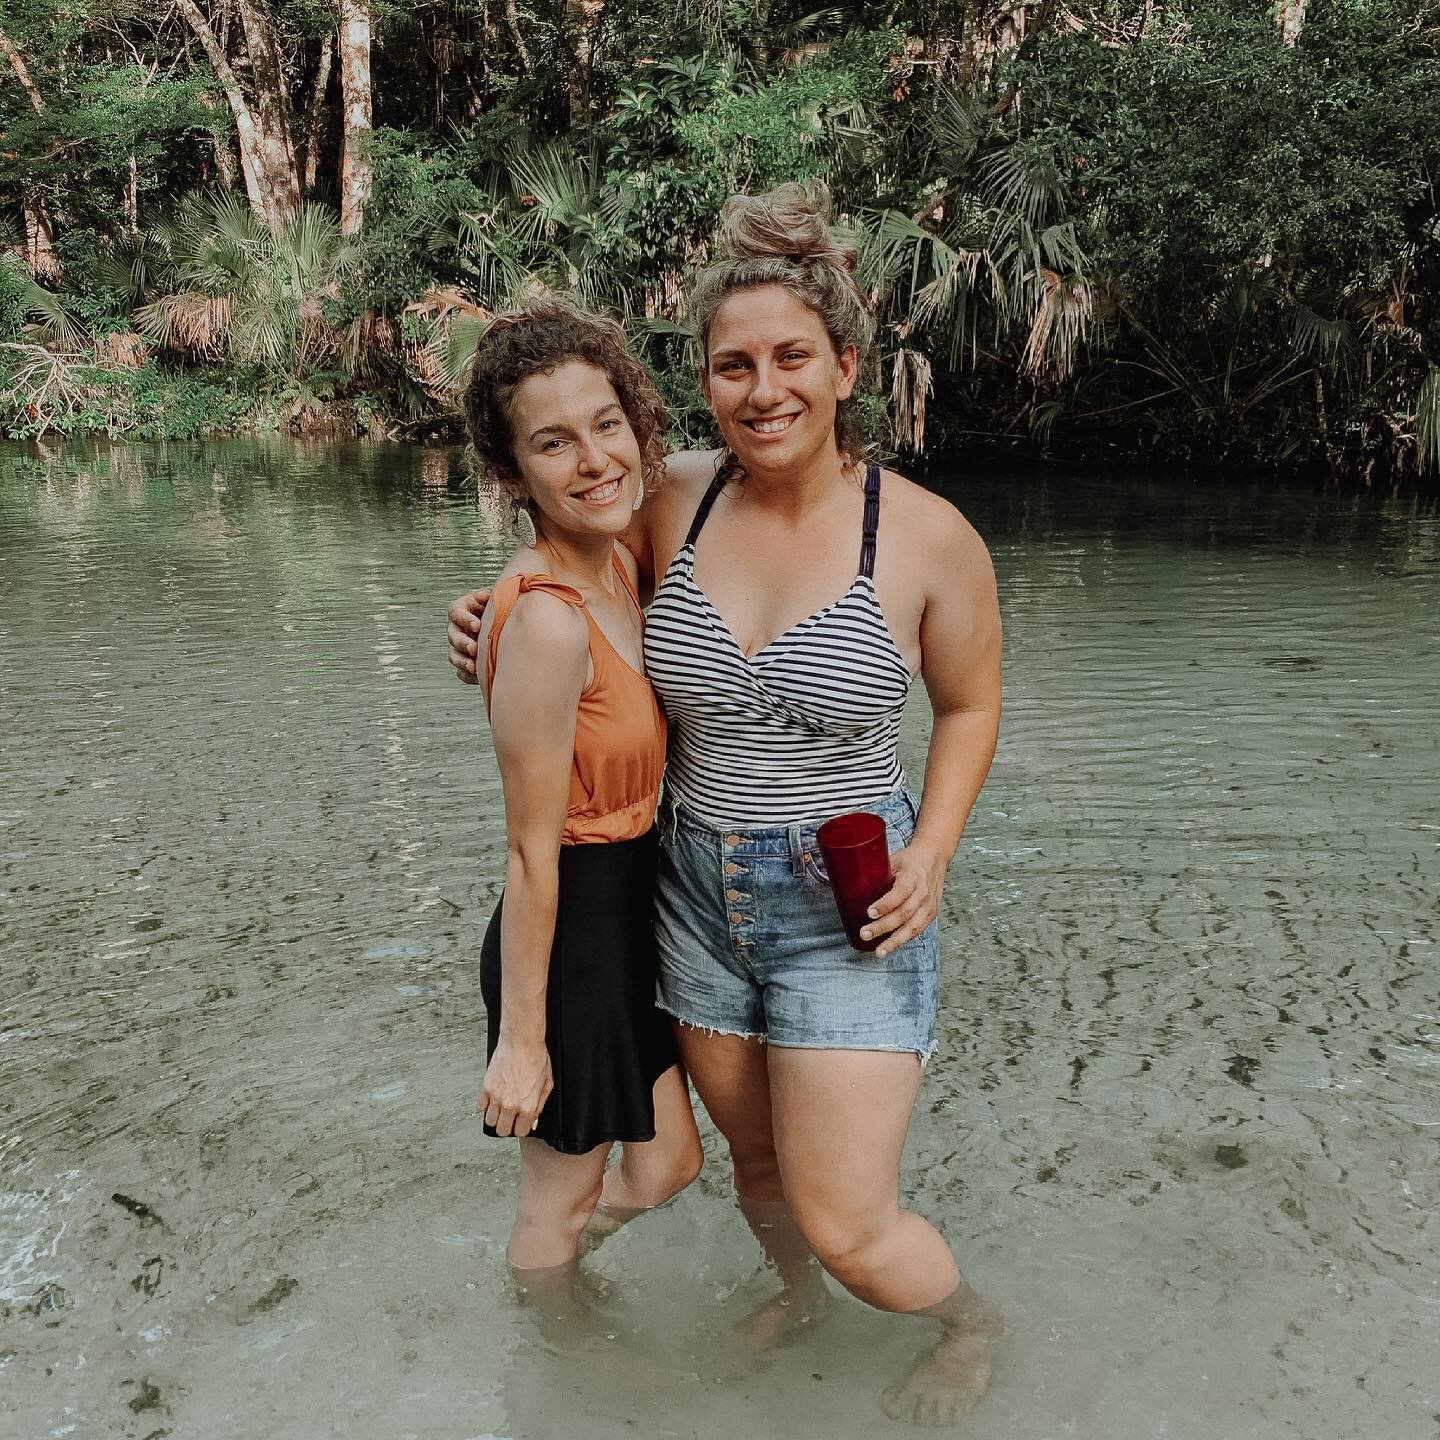 Yesterday was best friends day and I didn&rsquo;t even realize it. I got to spend time with one of my first best friends. We are going on 14 years! Crazy. Being on the River like old times was such a treat. The boys and Charlotte had a blast and want